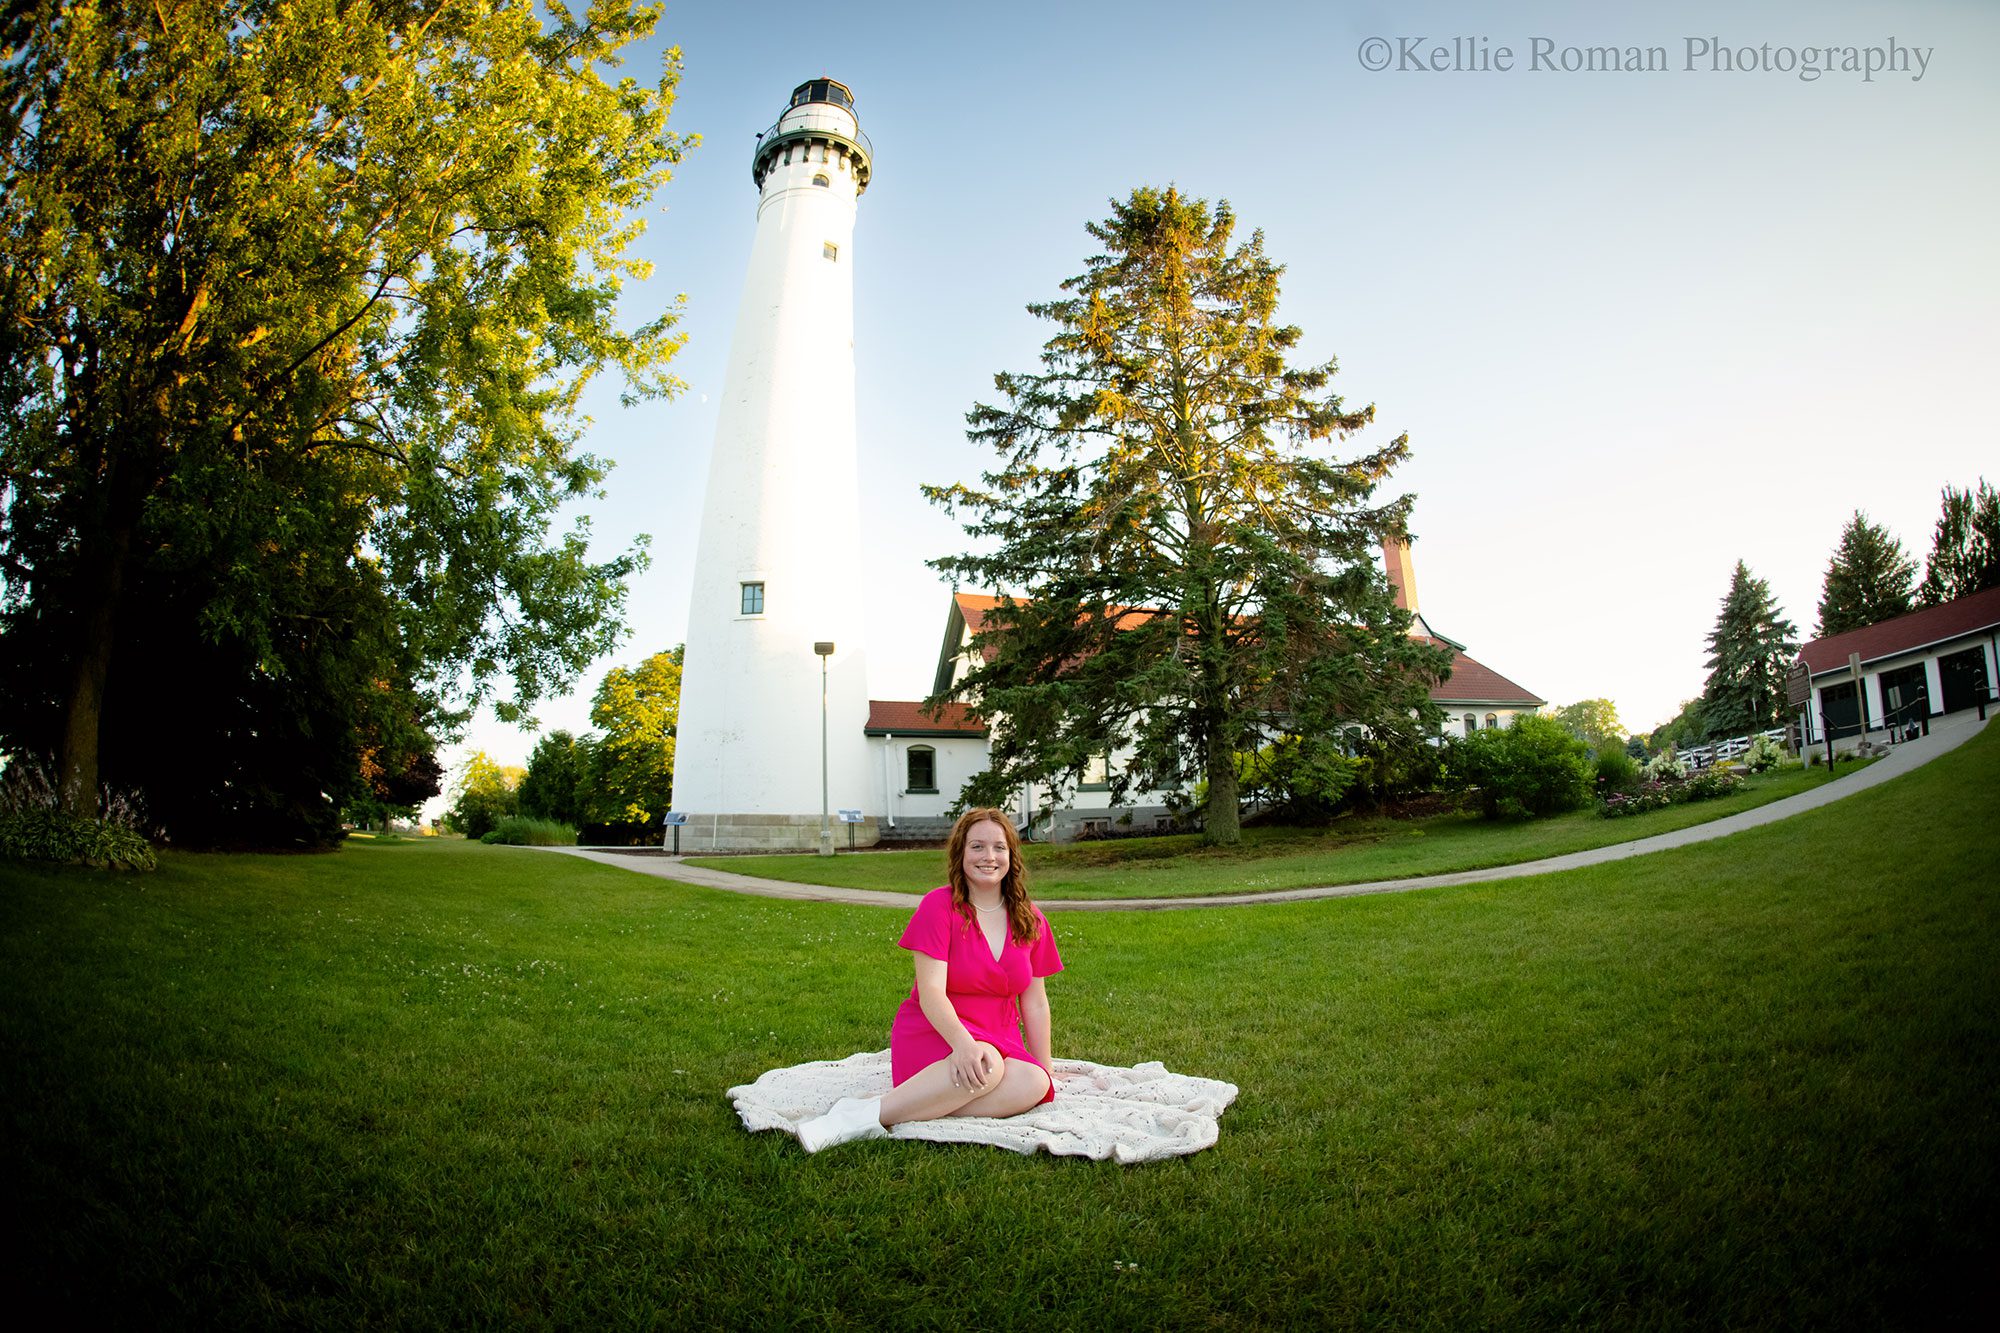 oak creek senior photography. high school senior girl wearing a hot pink dress is sitting on knit blanket in front of a white lighthouse in racine.